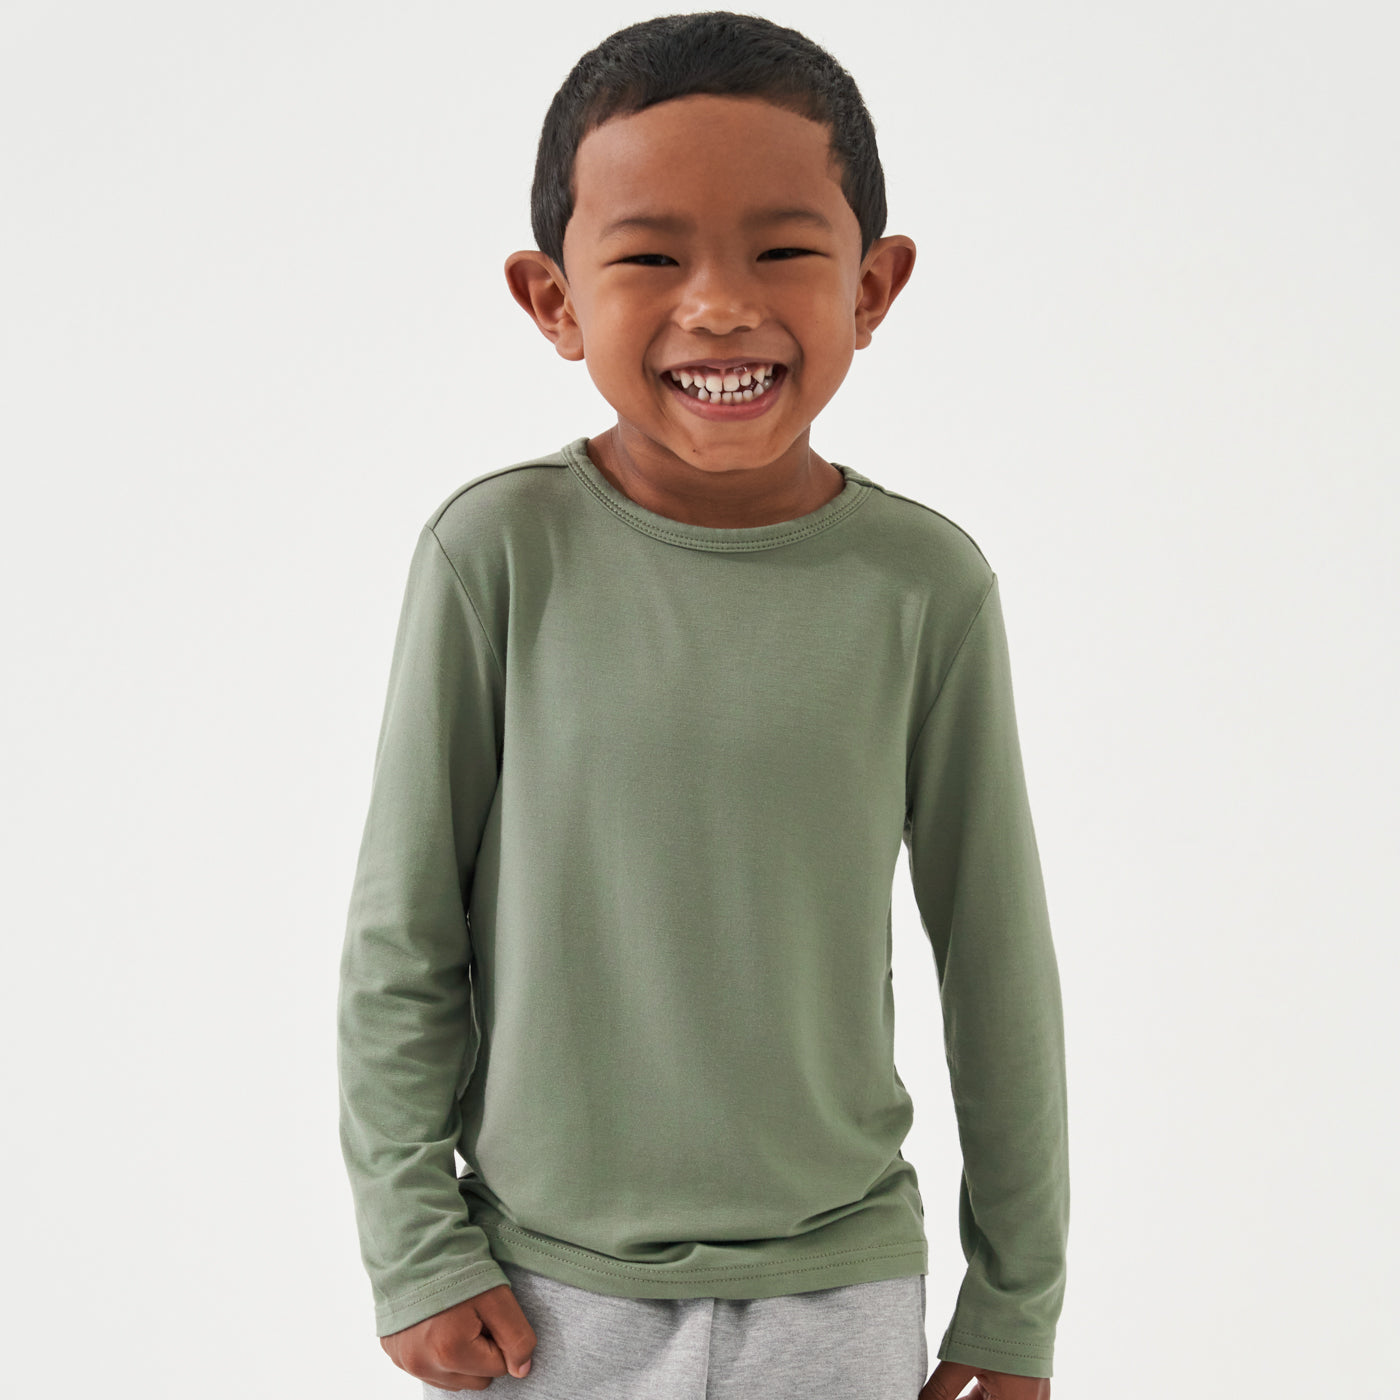 Child wearing a Moss classic tee